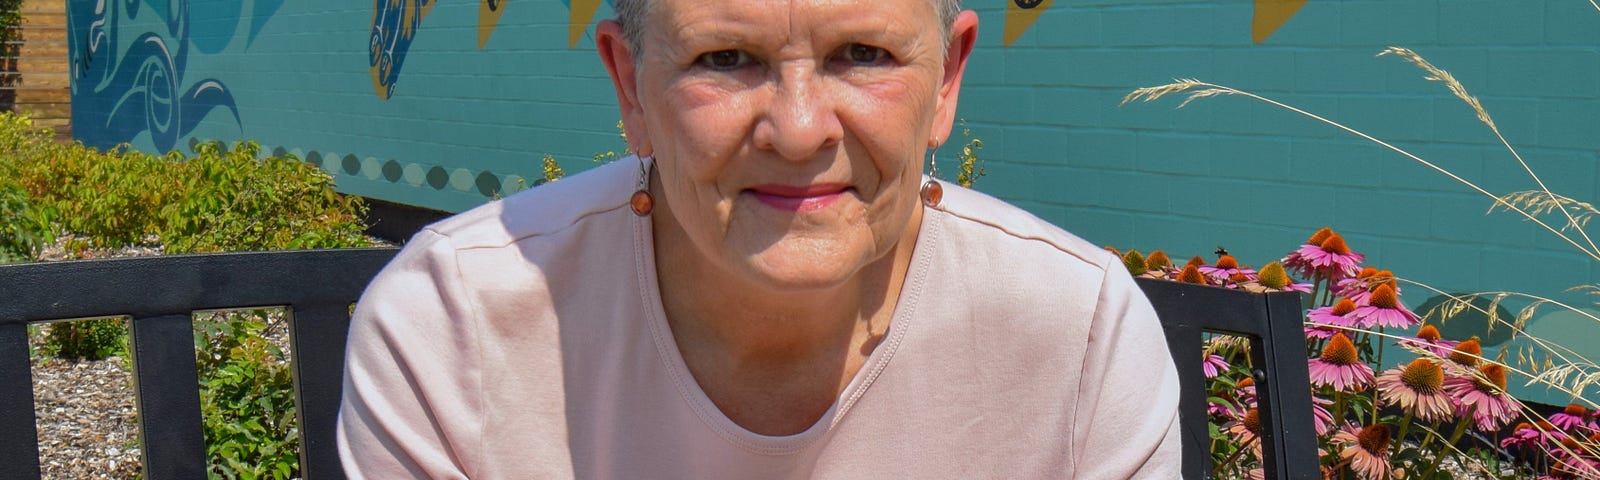 Woman in a pink shirt against a blue mural wall